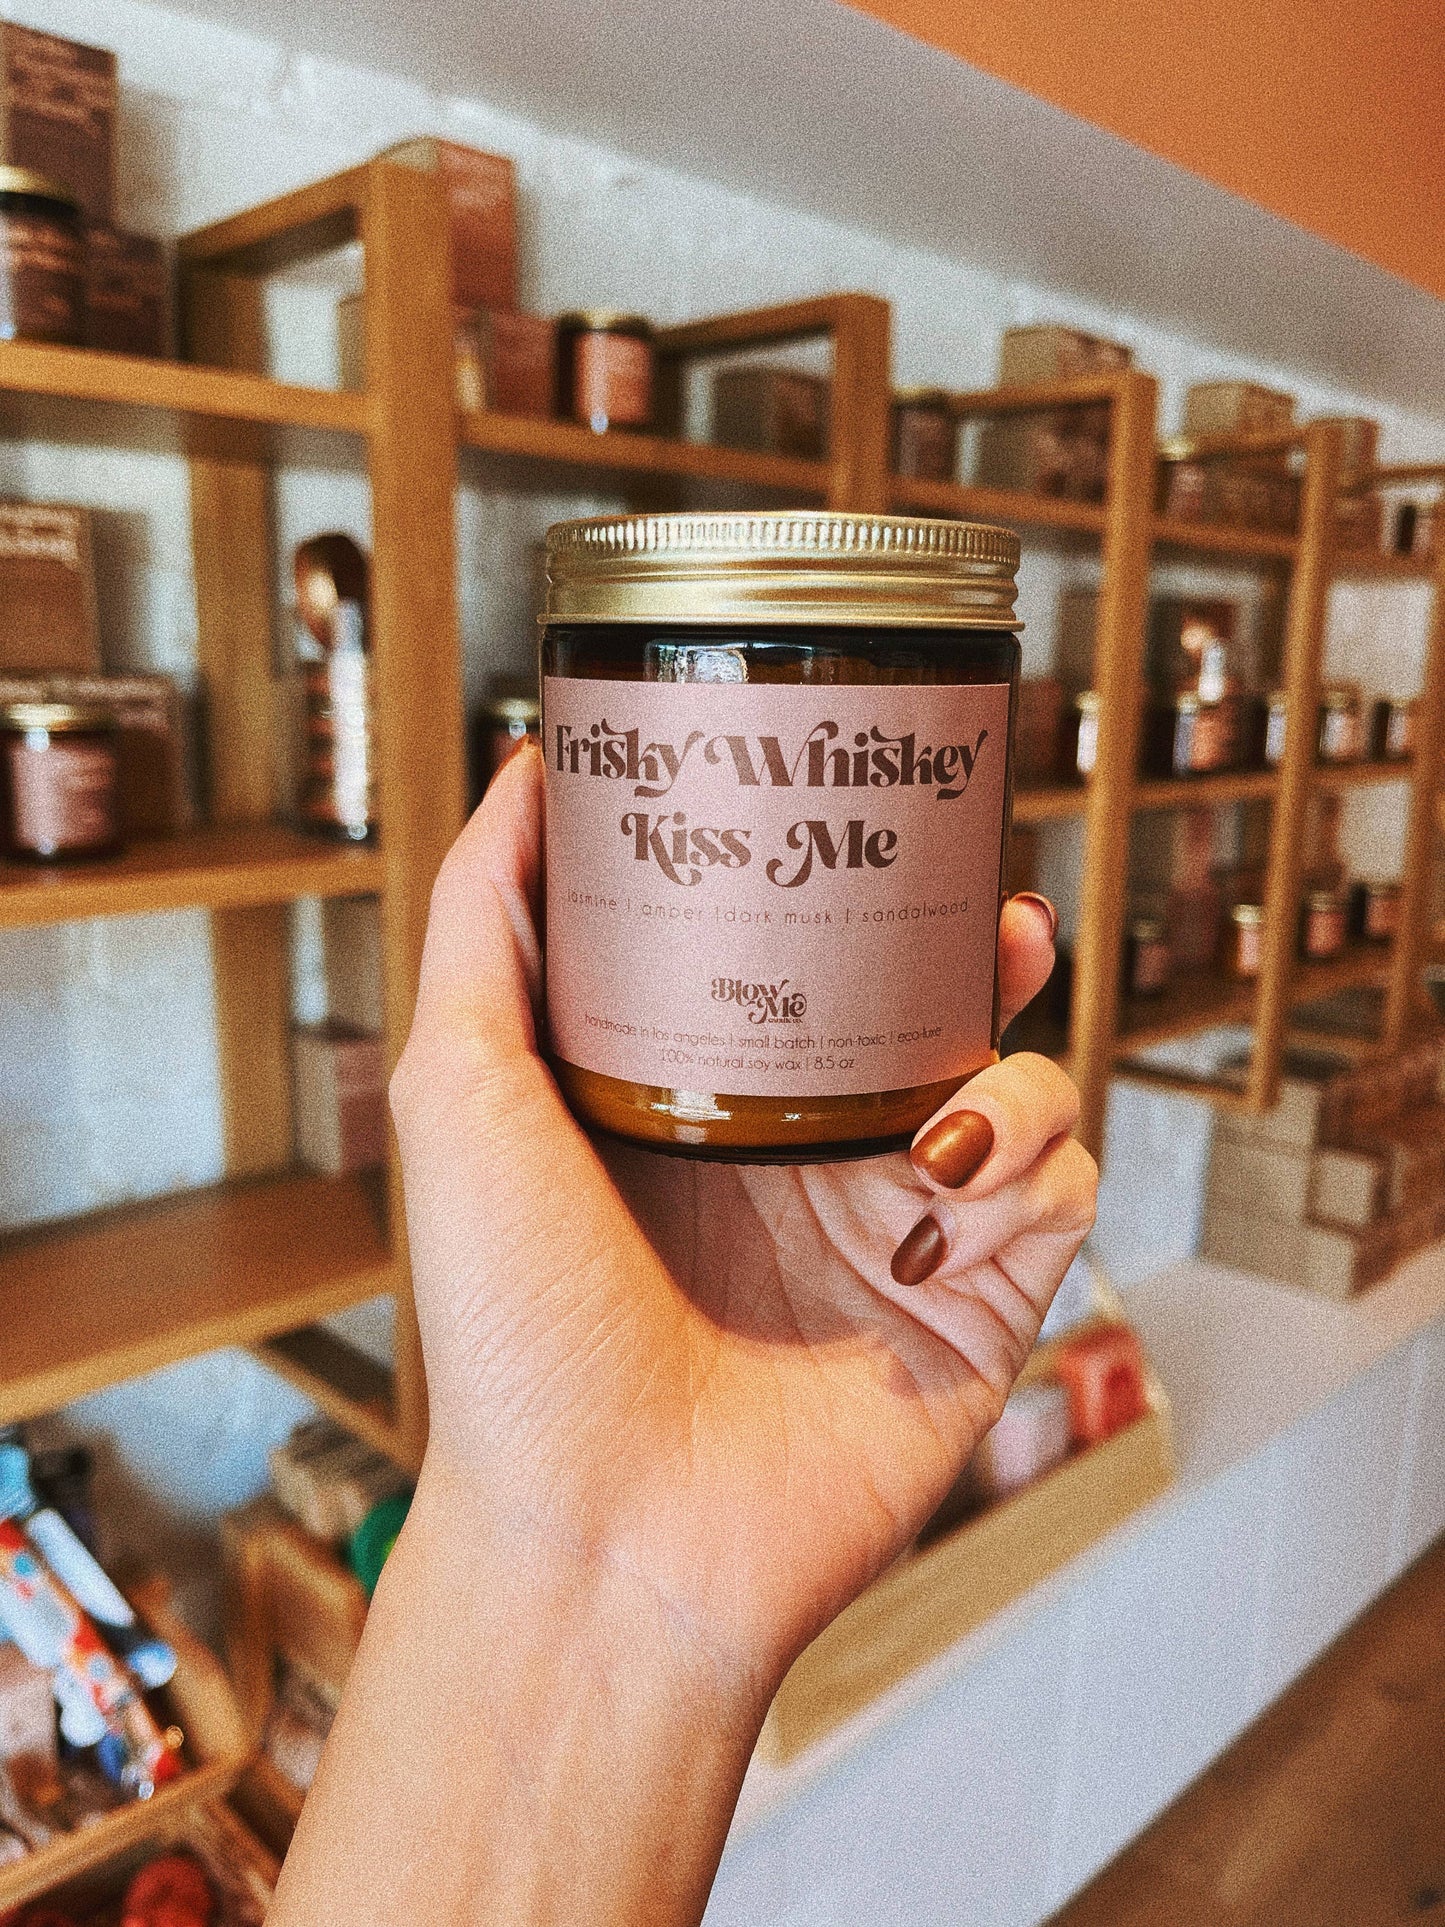 Frisky Whiskey Kiss Me Scented Candle